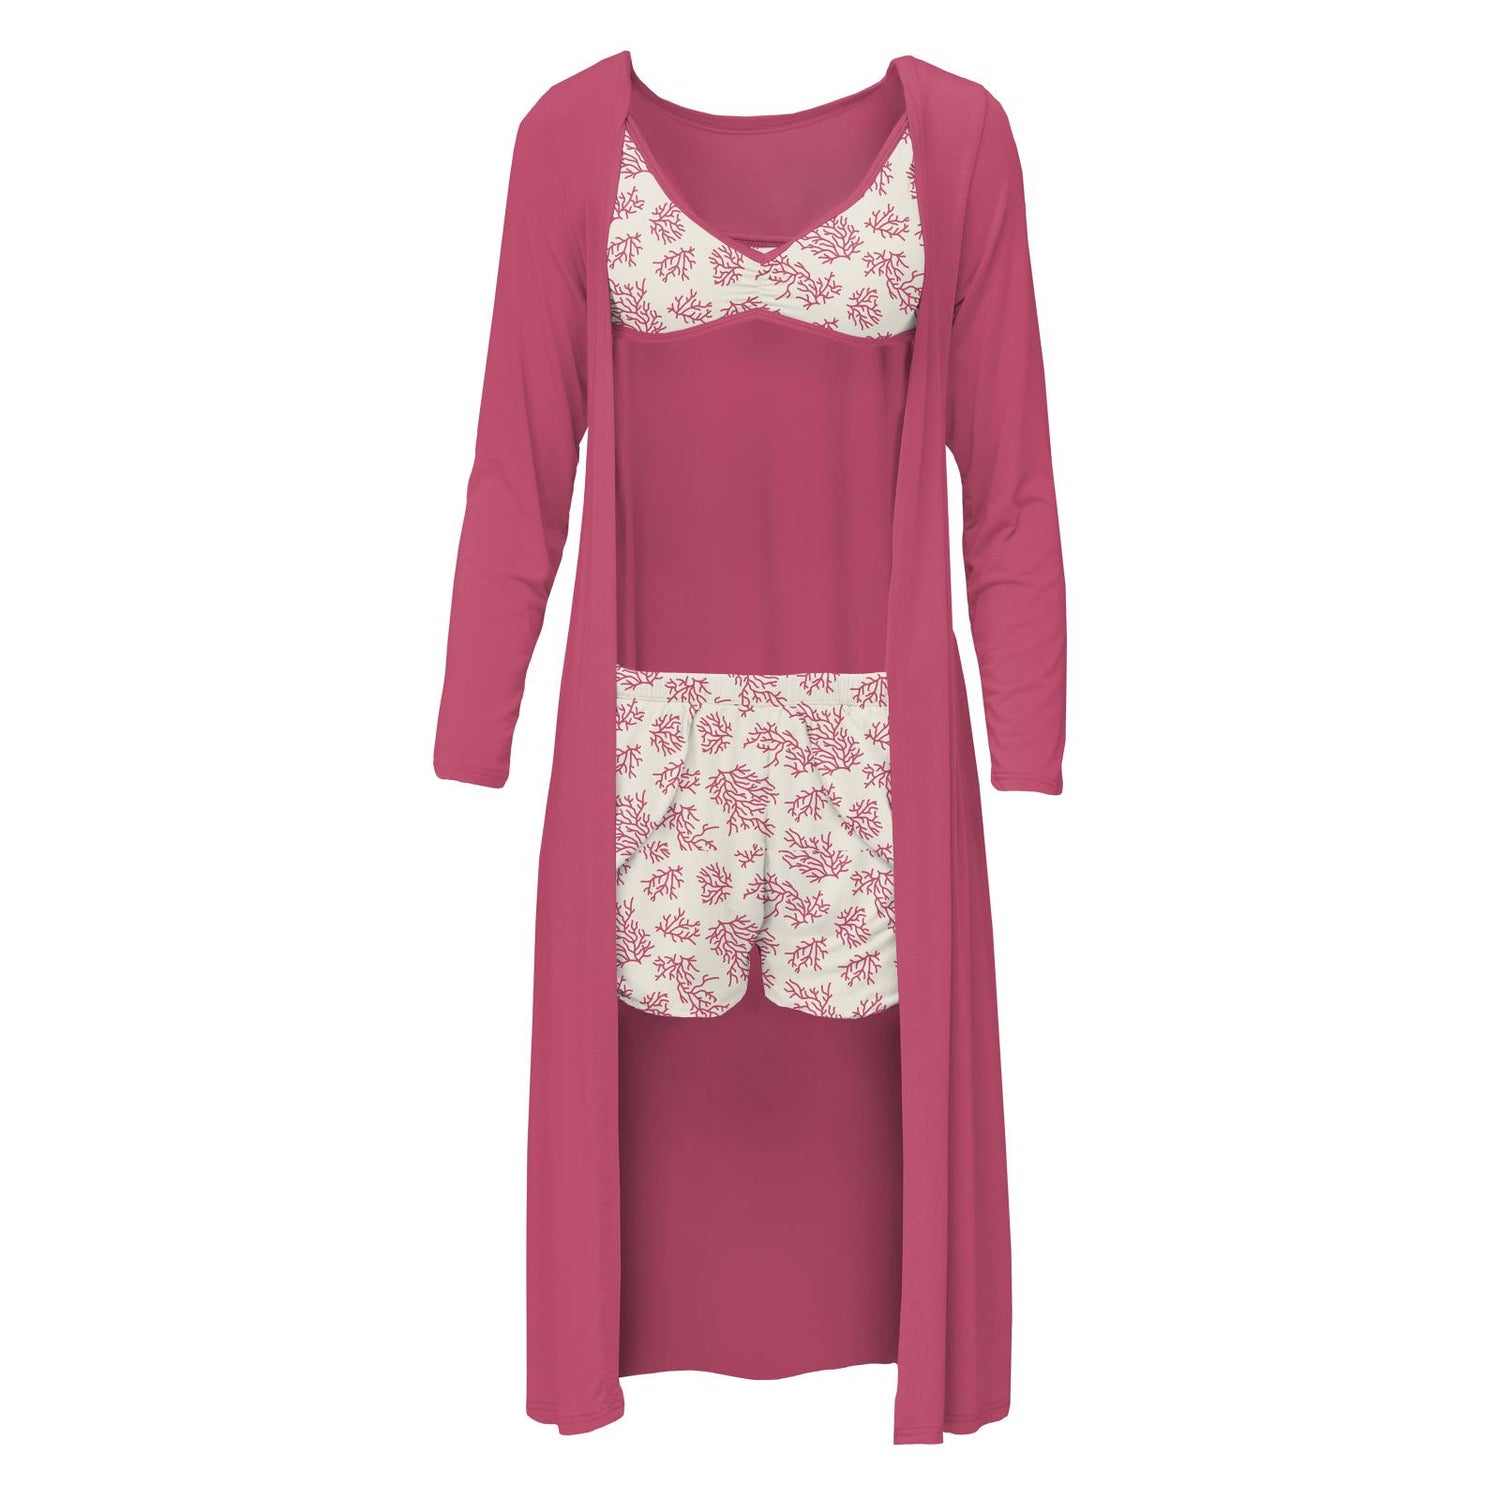 Women's Print Sleeping Bra, Tulip Shorts and Duster Robe Set in Natural Coral